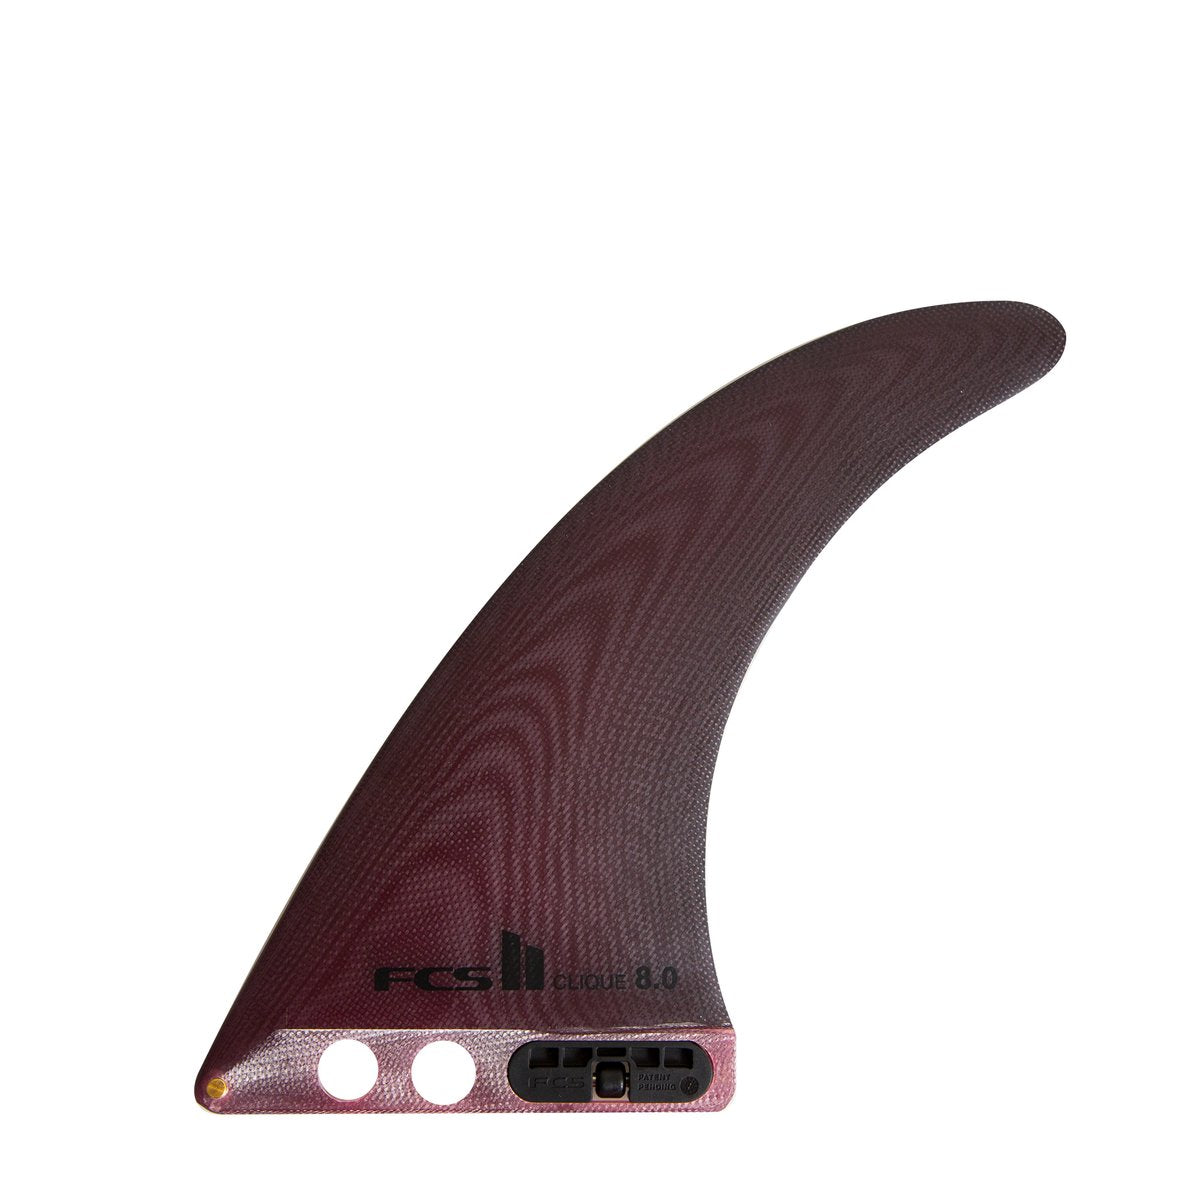 FCS 2 Clique PG Longboard Fin Dust Red 8in